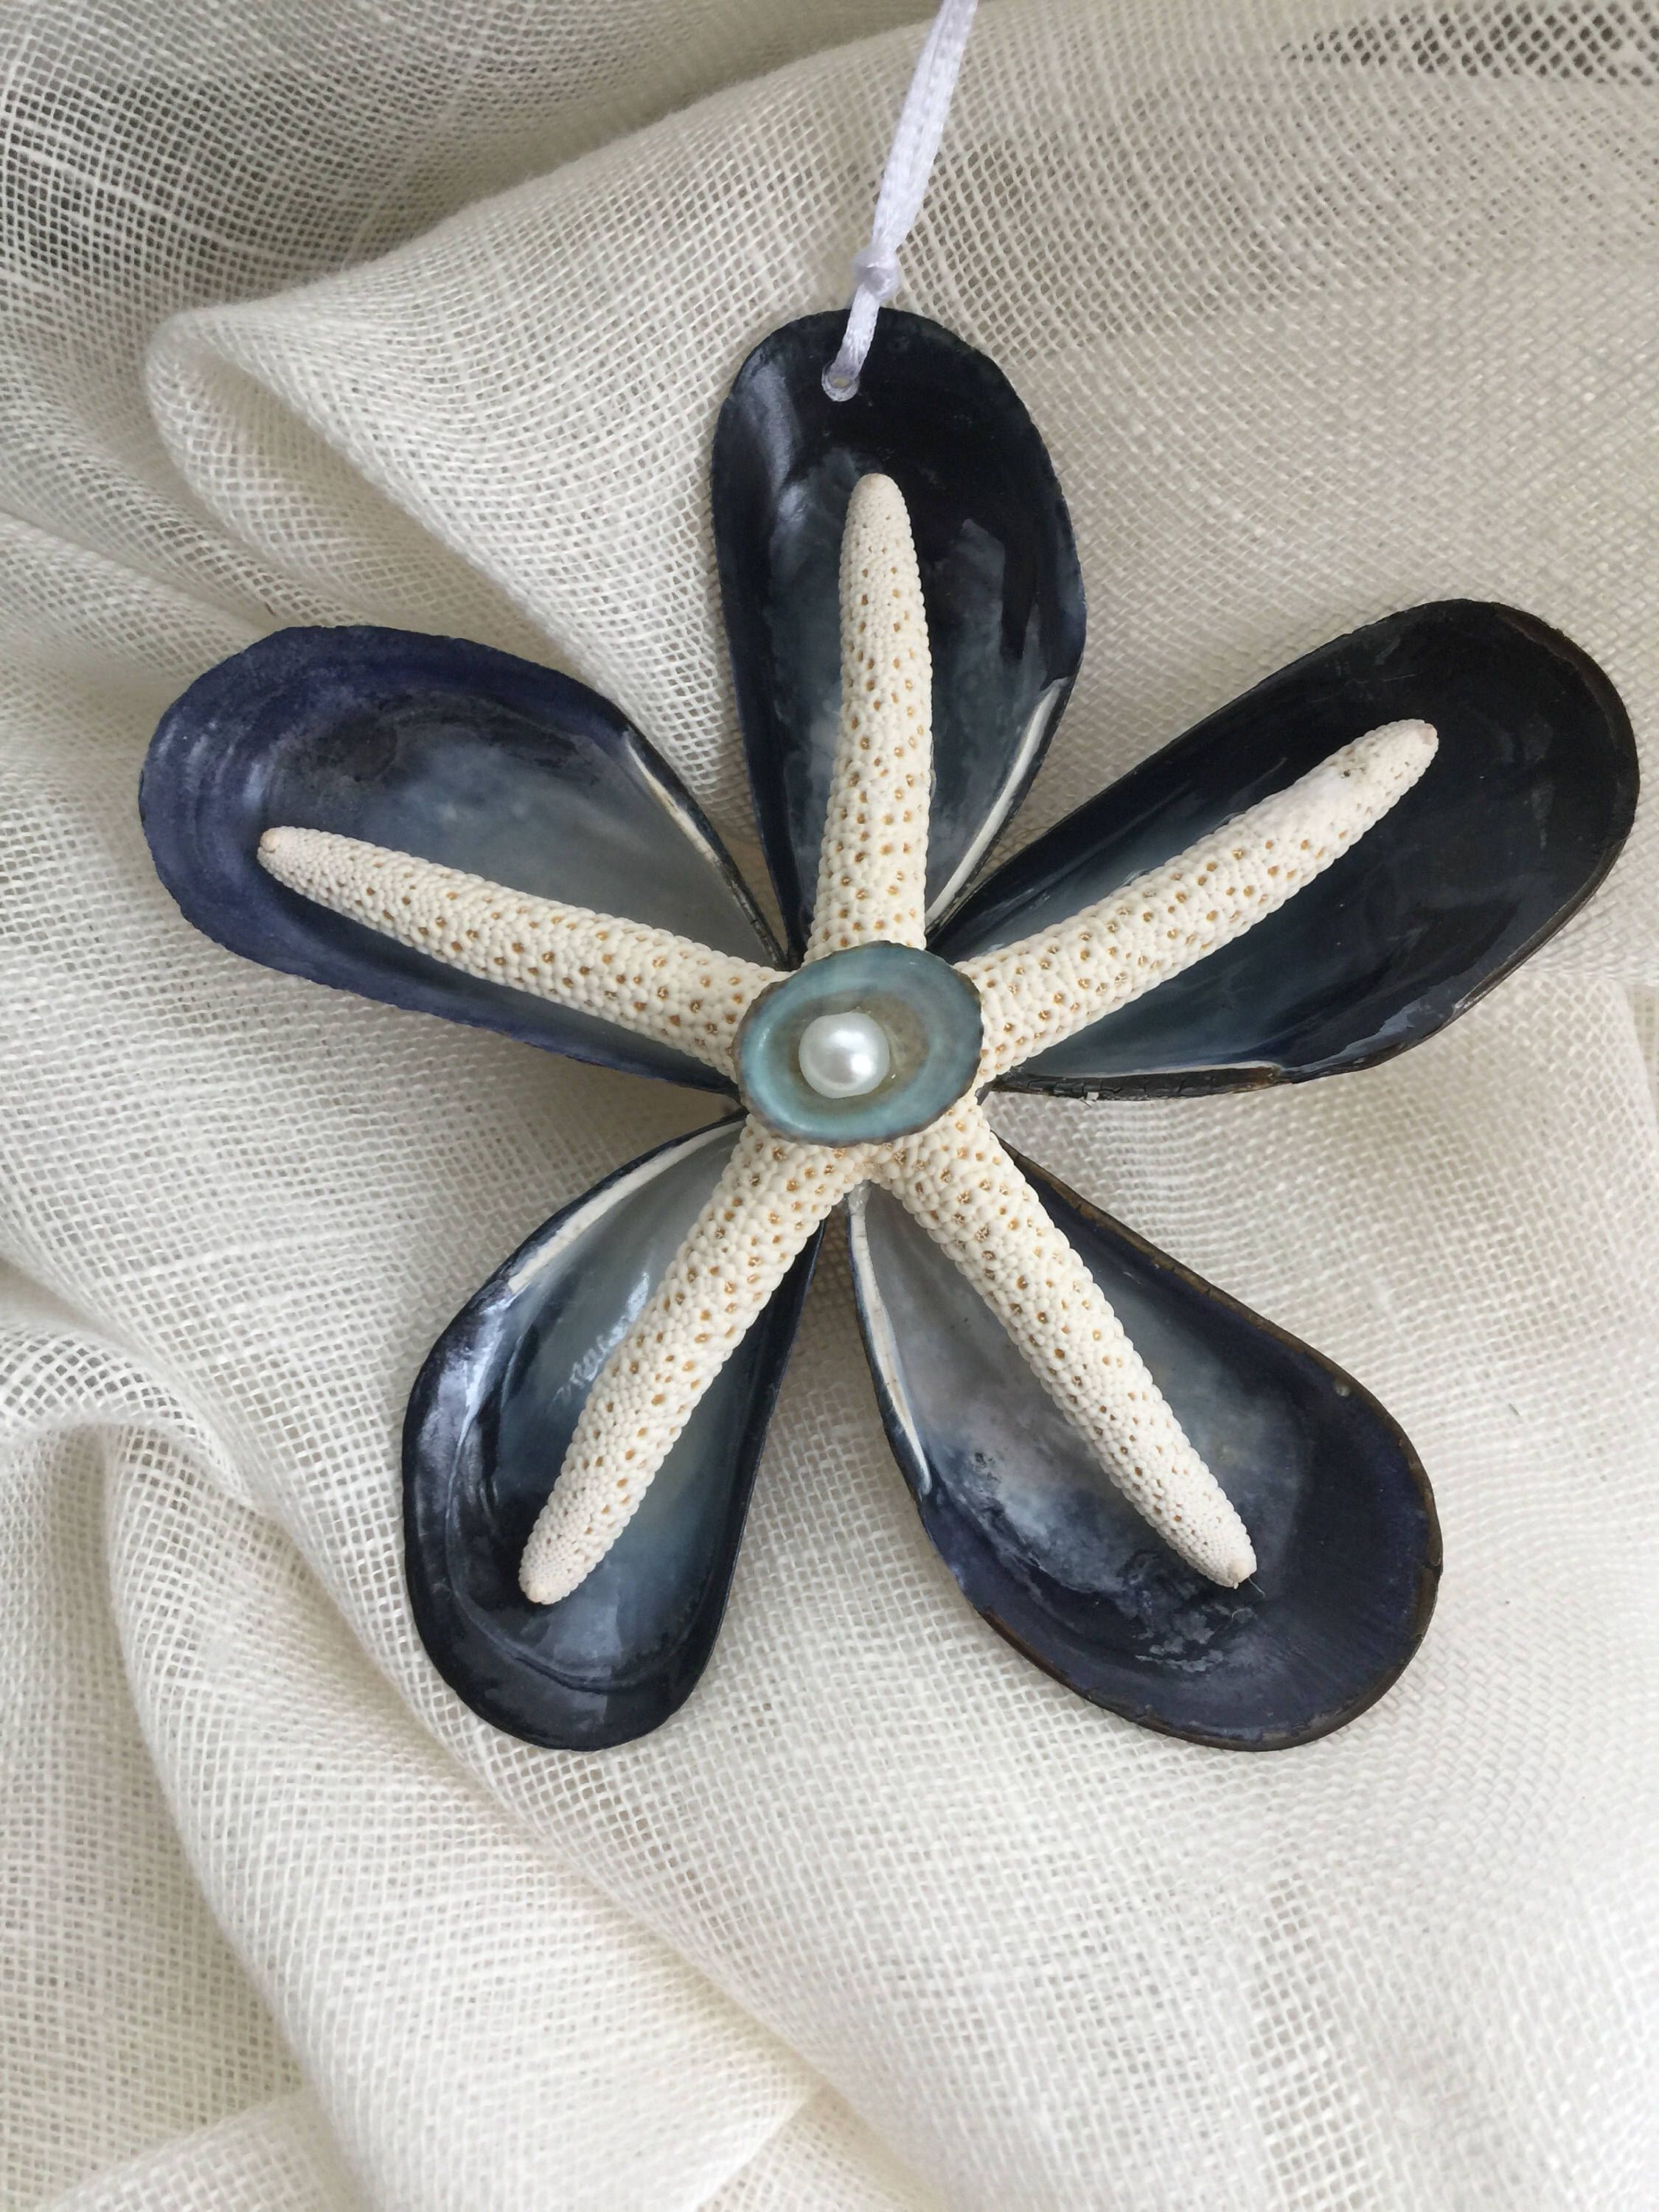 Mussel star ornament -   18 seashell crafts butterfly
 ideas